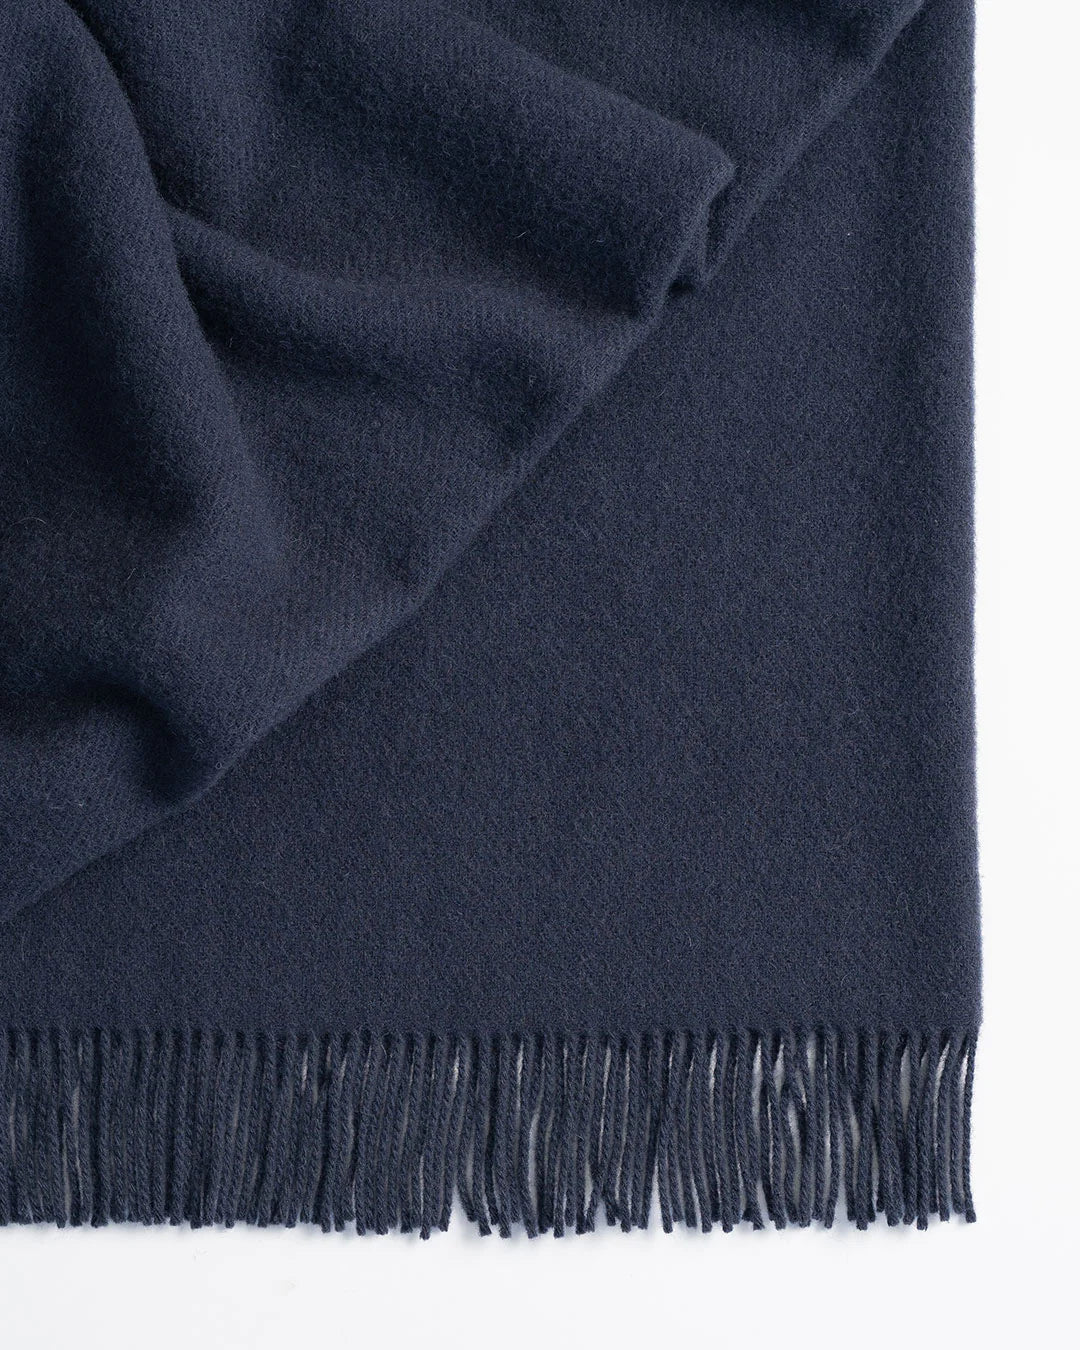 Made from 100% New Zealand lambswool, Nevis throw blankets in Navy are simply luxurious. All of our throws make the perfect companion over cooler days and nights, and can also be enjoyed outdoors